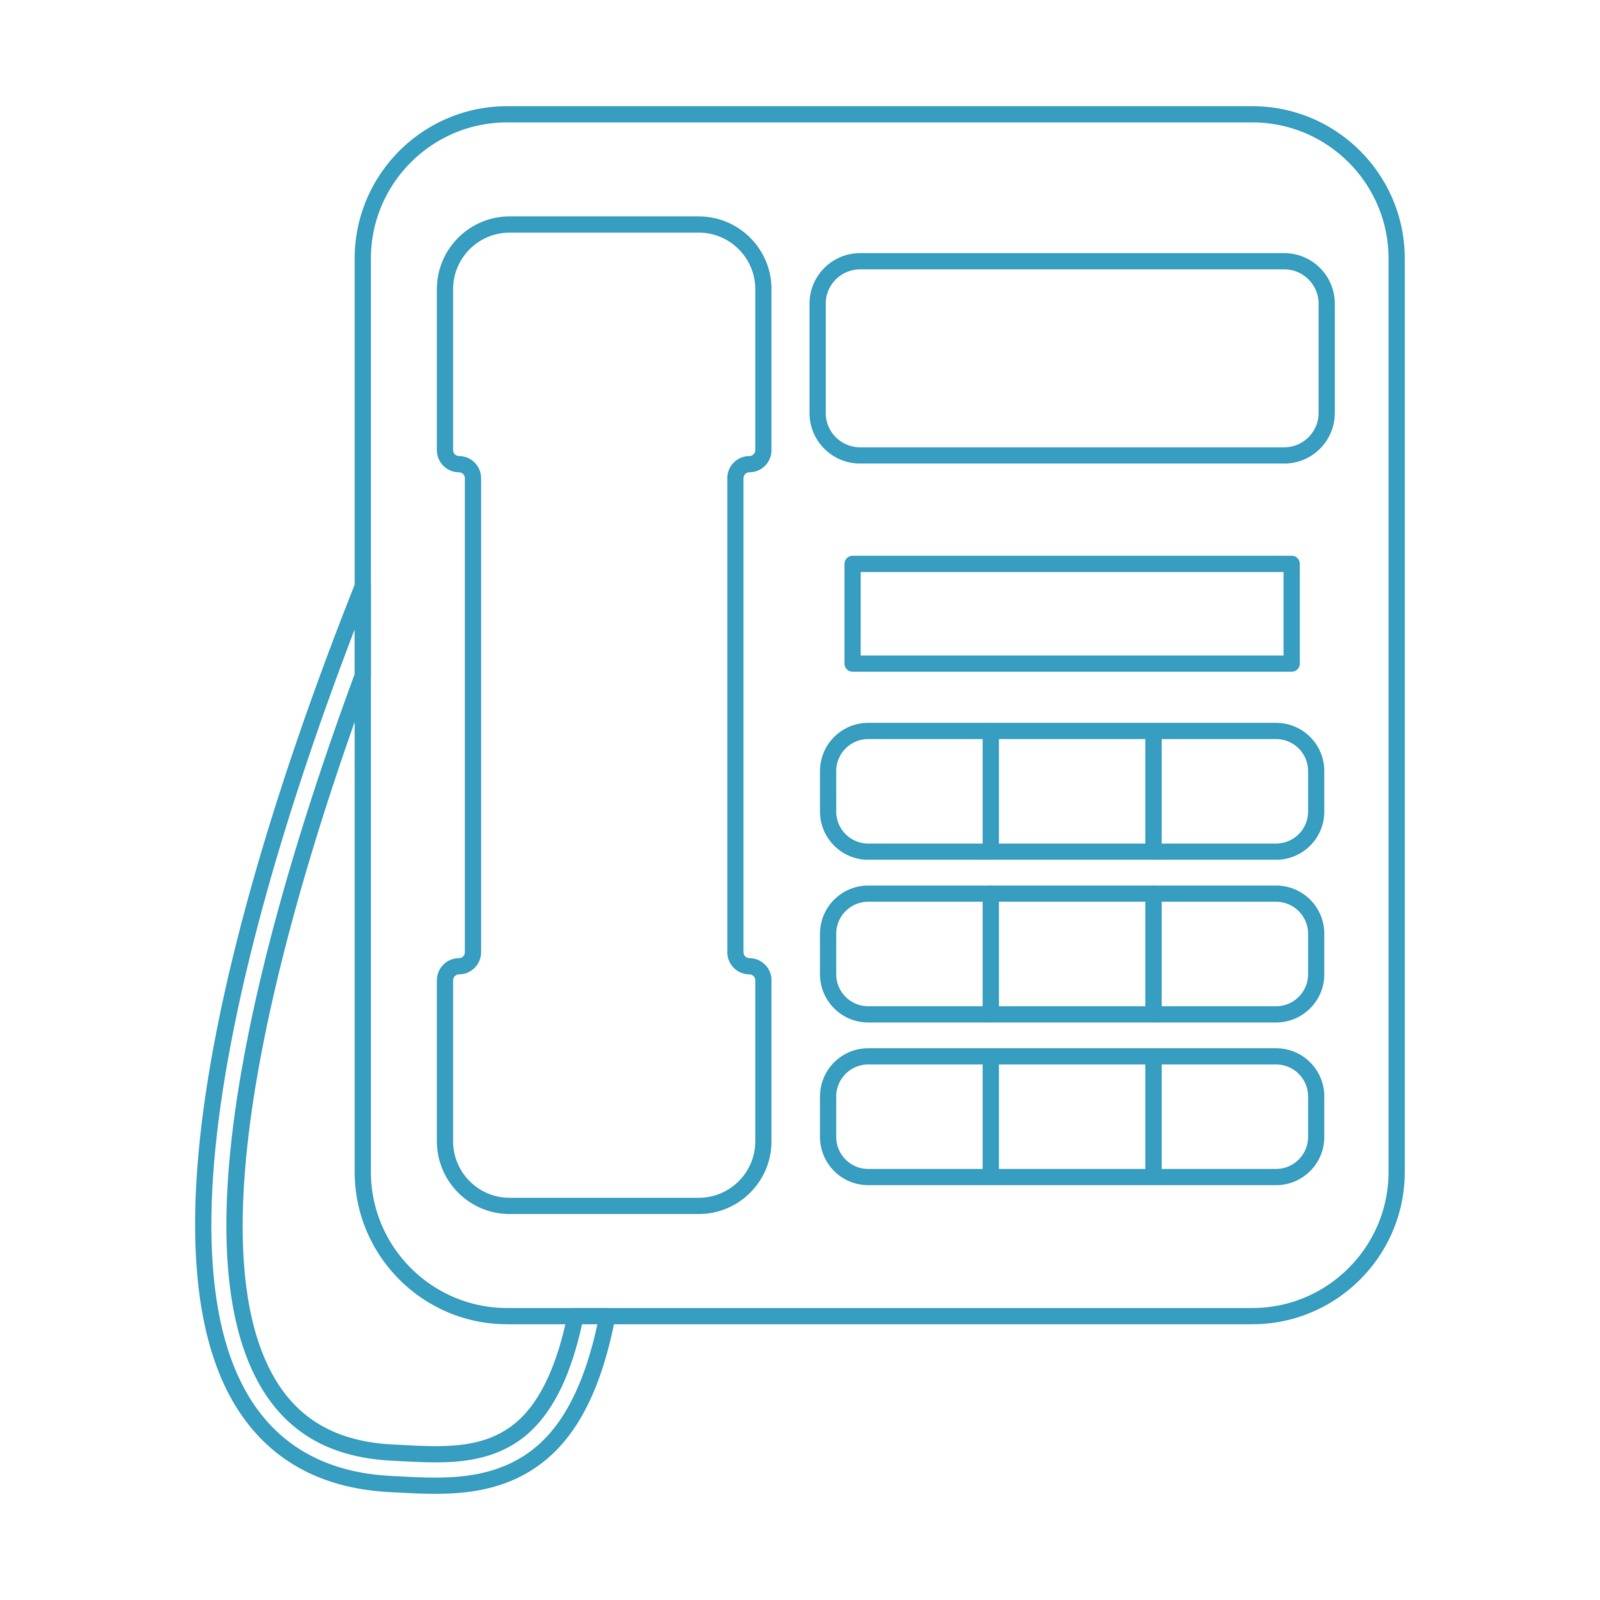 Thin line telephone icon by ang_bay